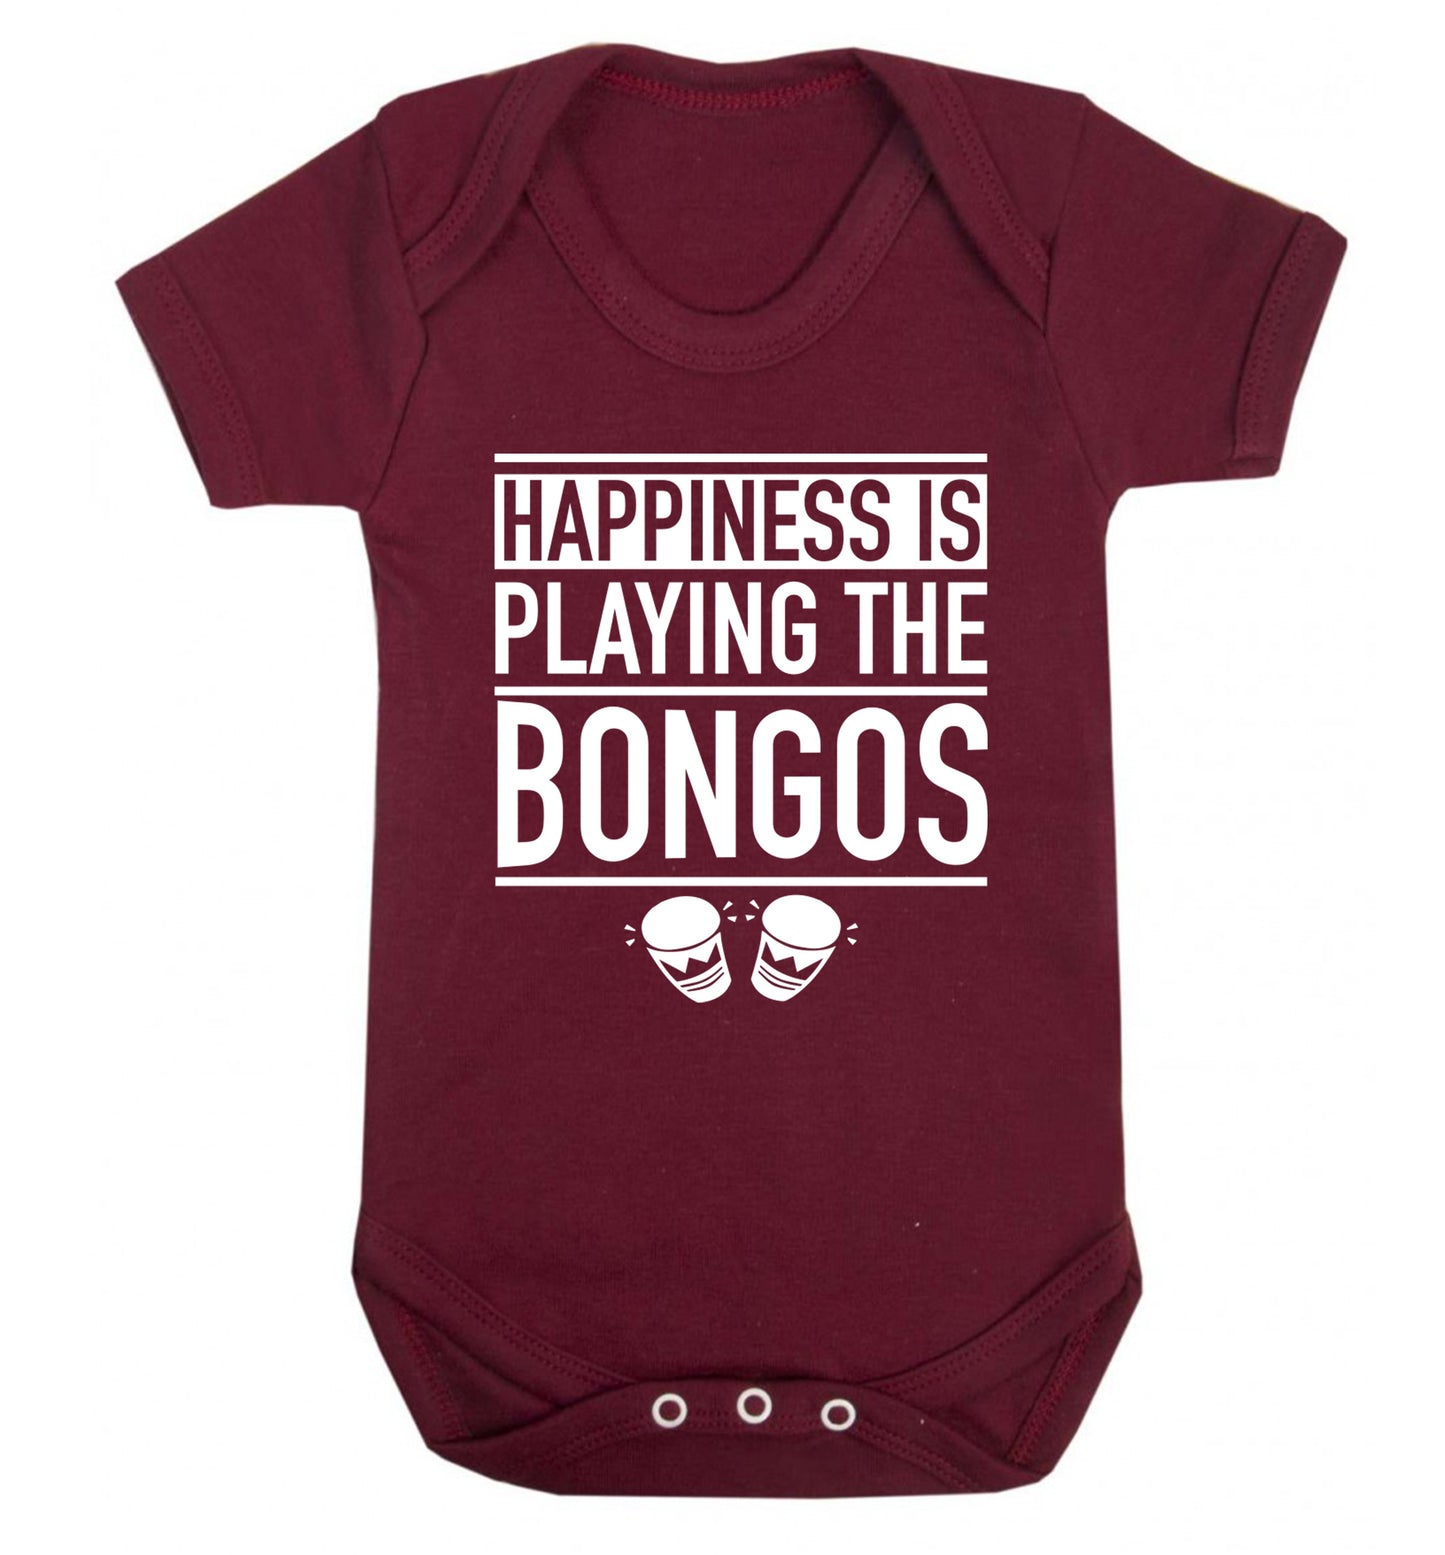 Happiness is playing the bongos Baby Vest maroon 18-24 months